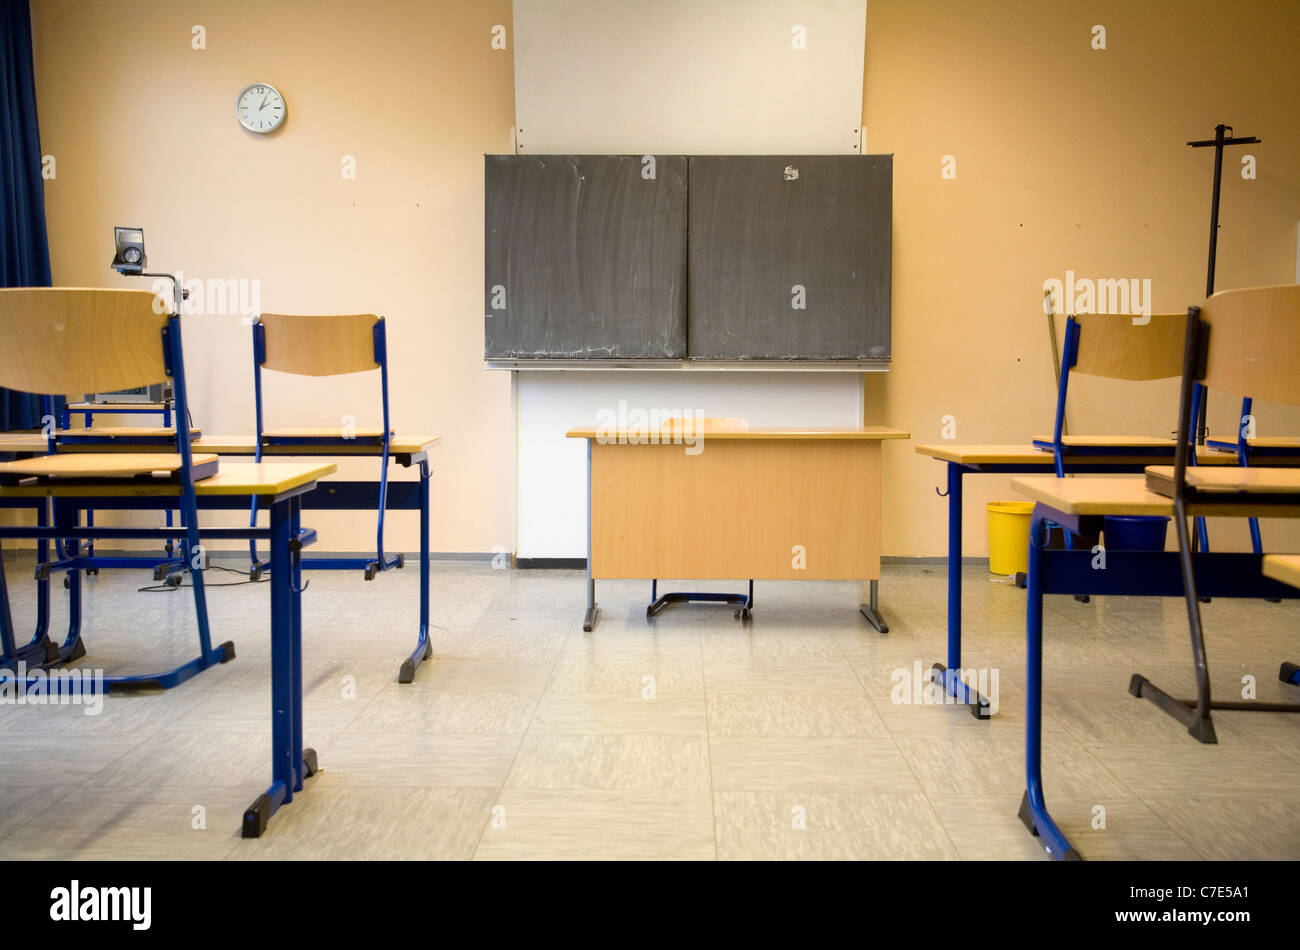 A classroom, Duesseldorf, Germany Stock Photo